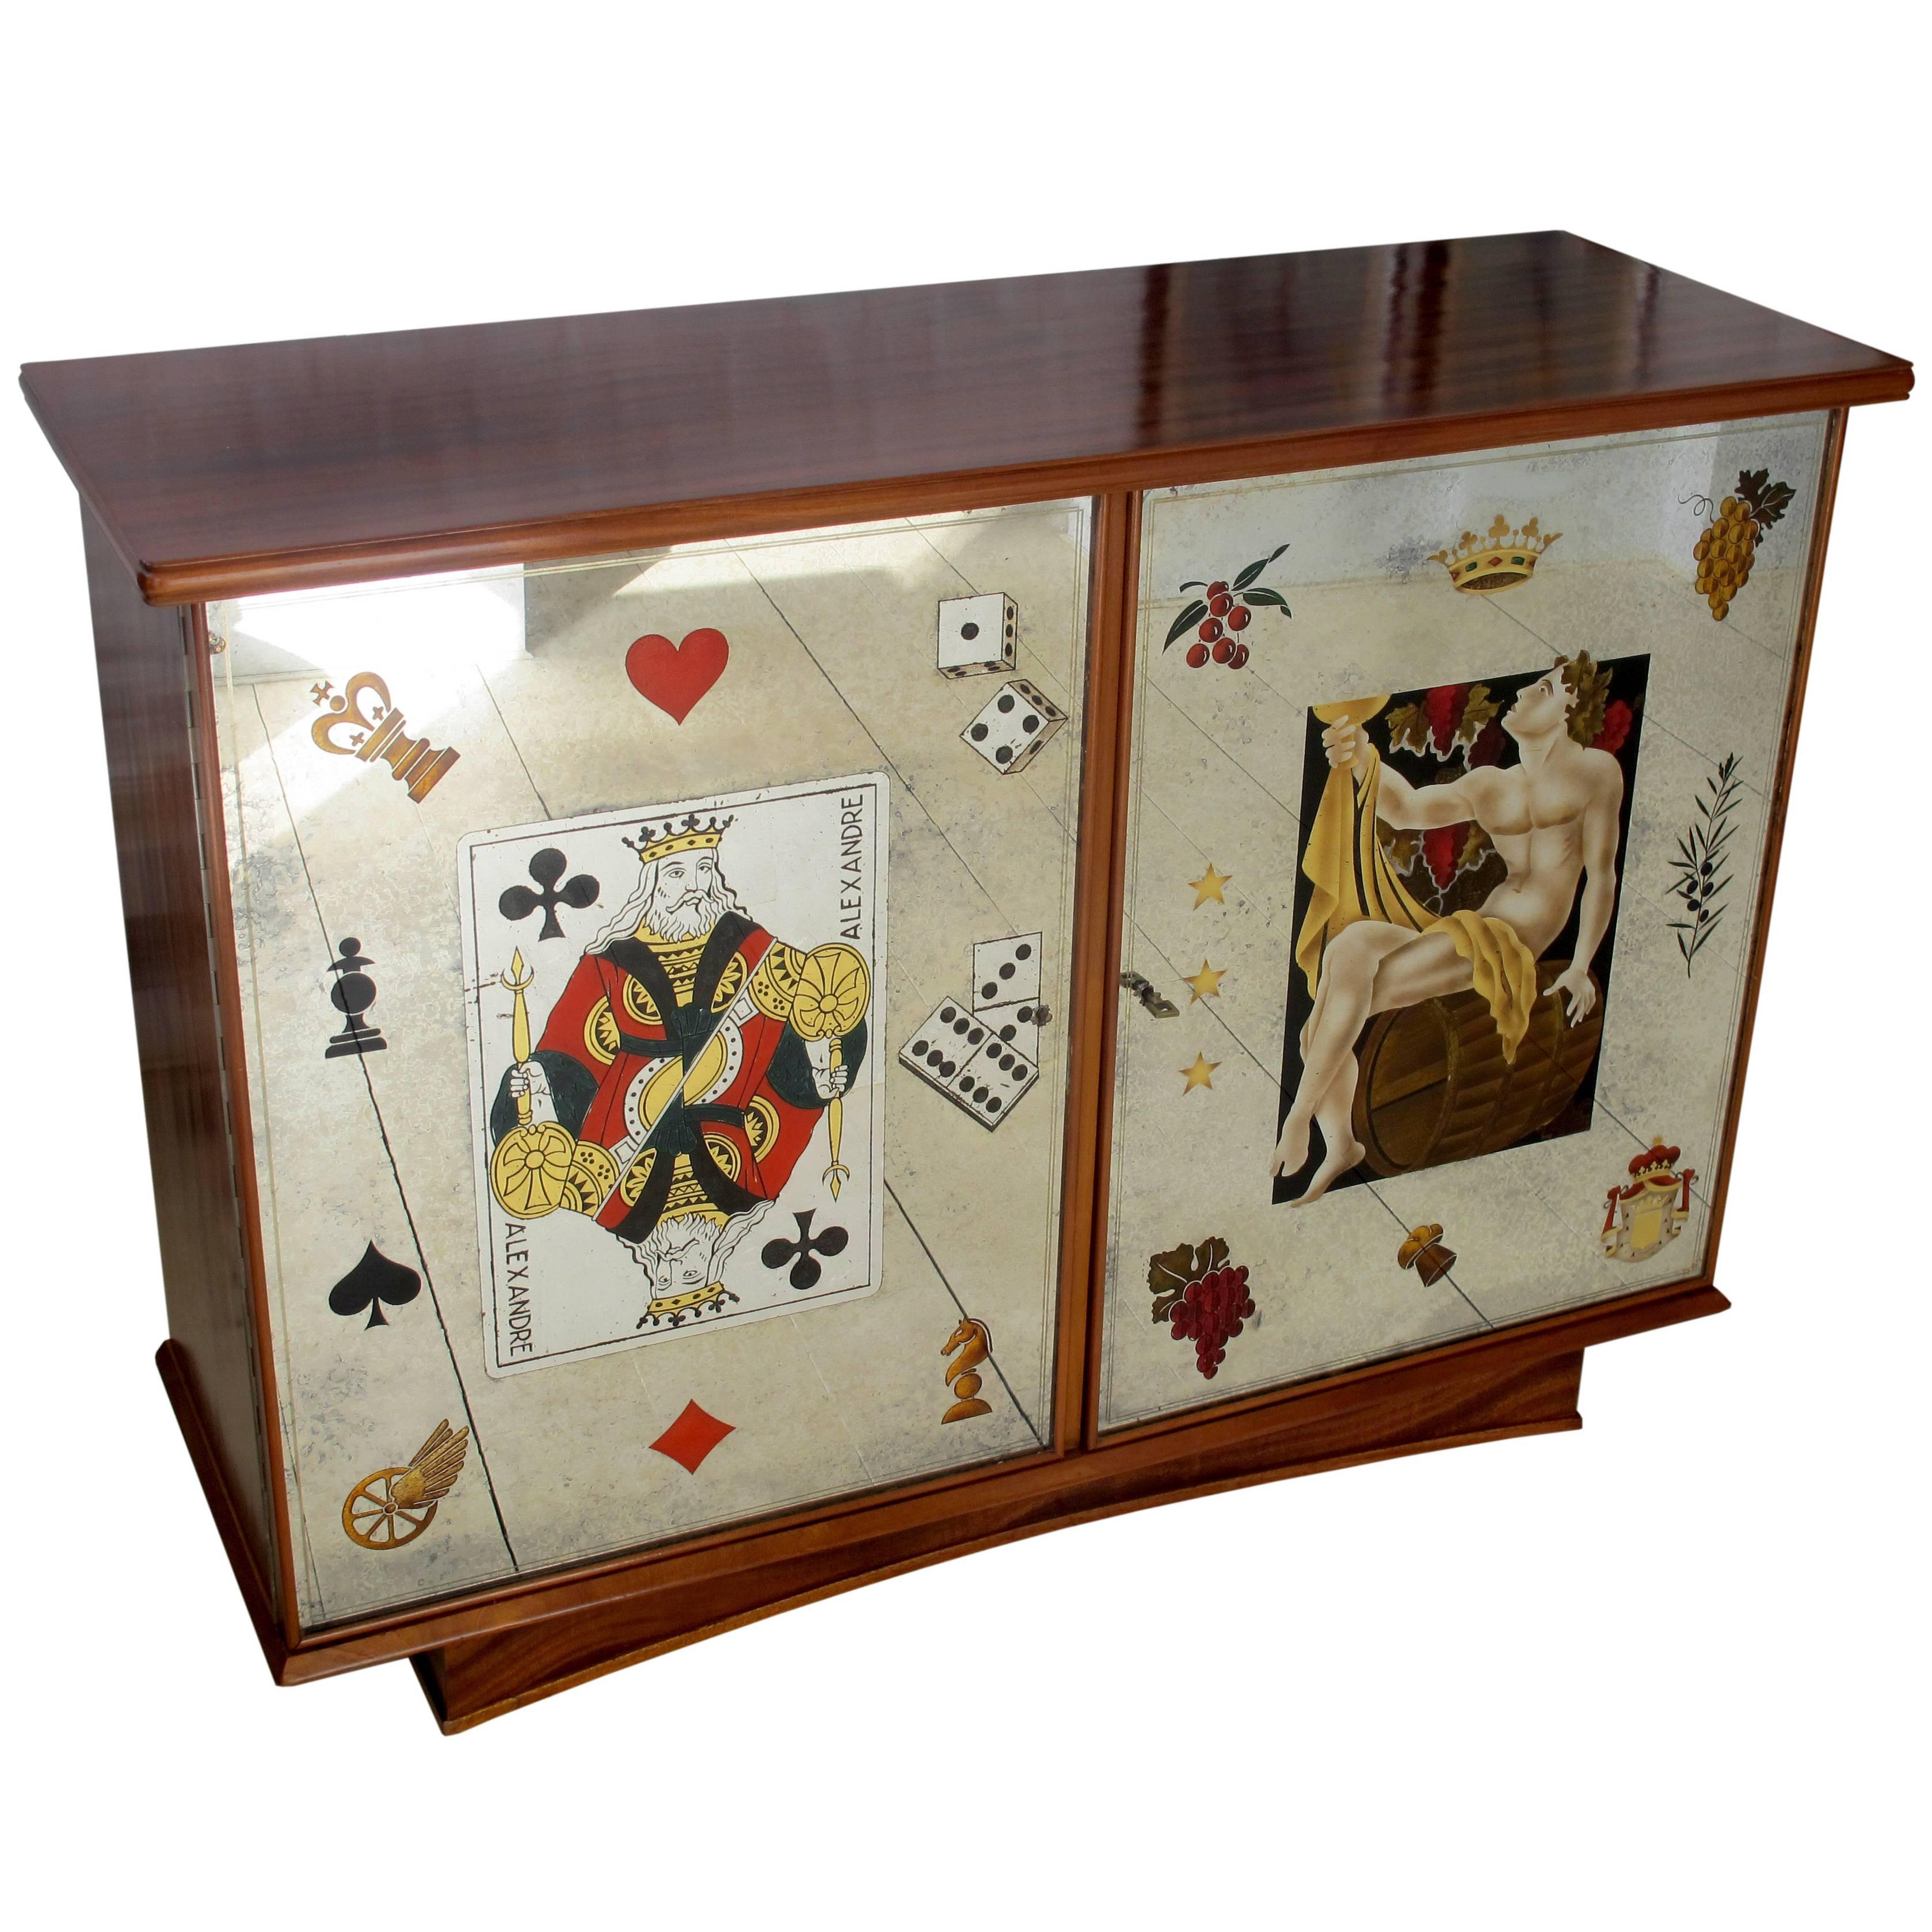 Art Deco Bespoke Drinks and Games Cabinet in Eglomise Glass